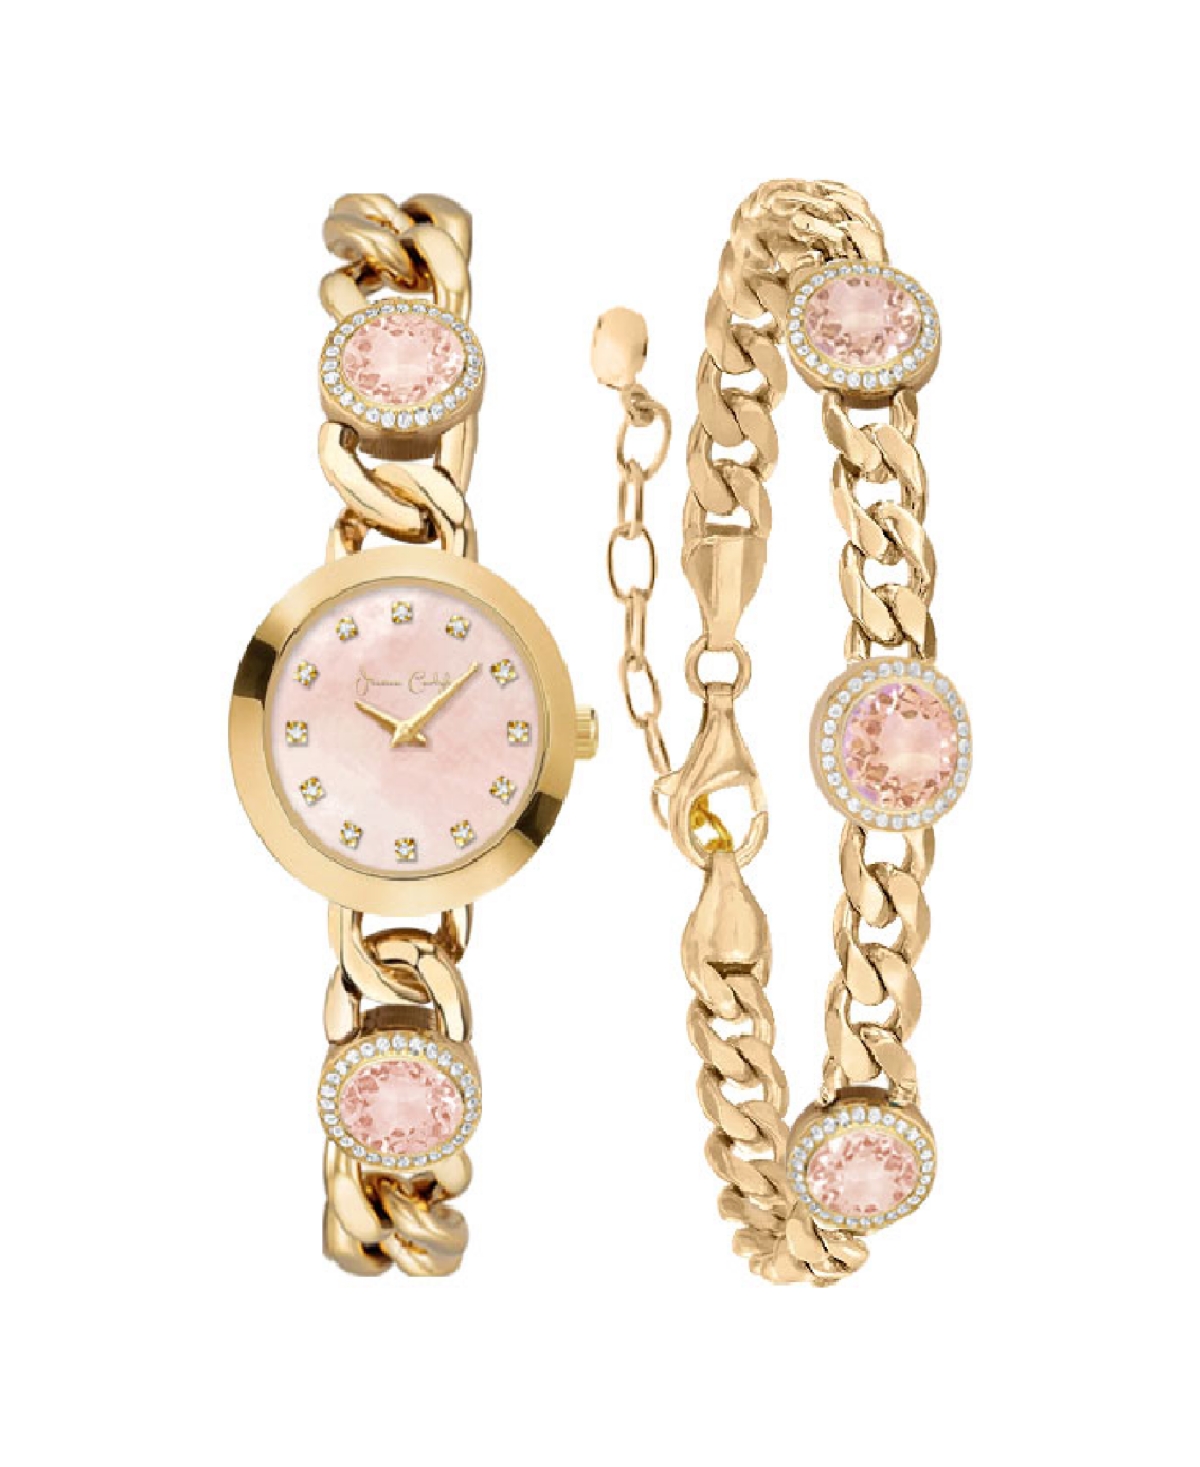 Jessica Carlyle Women's Quartz Gold-tone Alloy Watch 22.55mm Gift Set In Shiny Gold,blush Mother Of Pearl